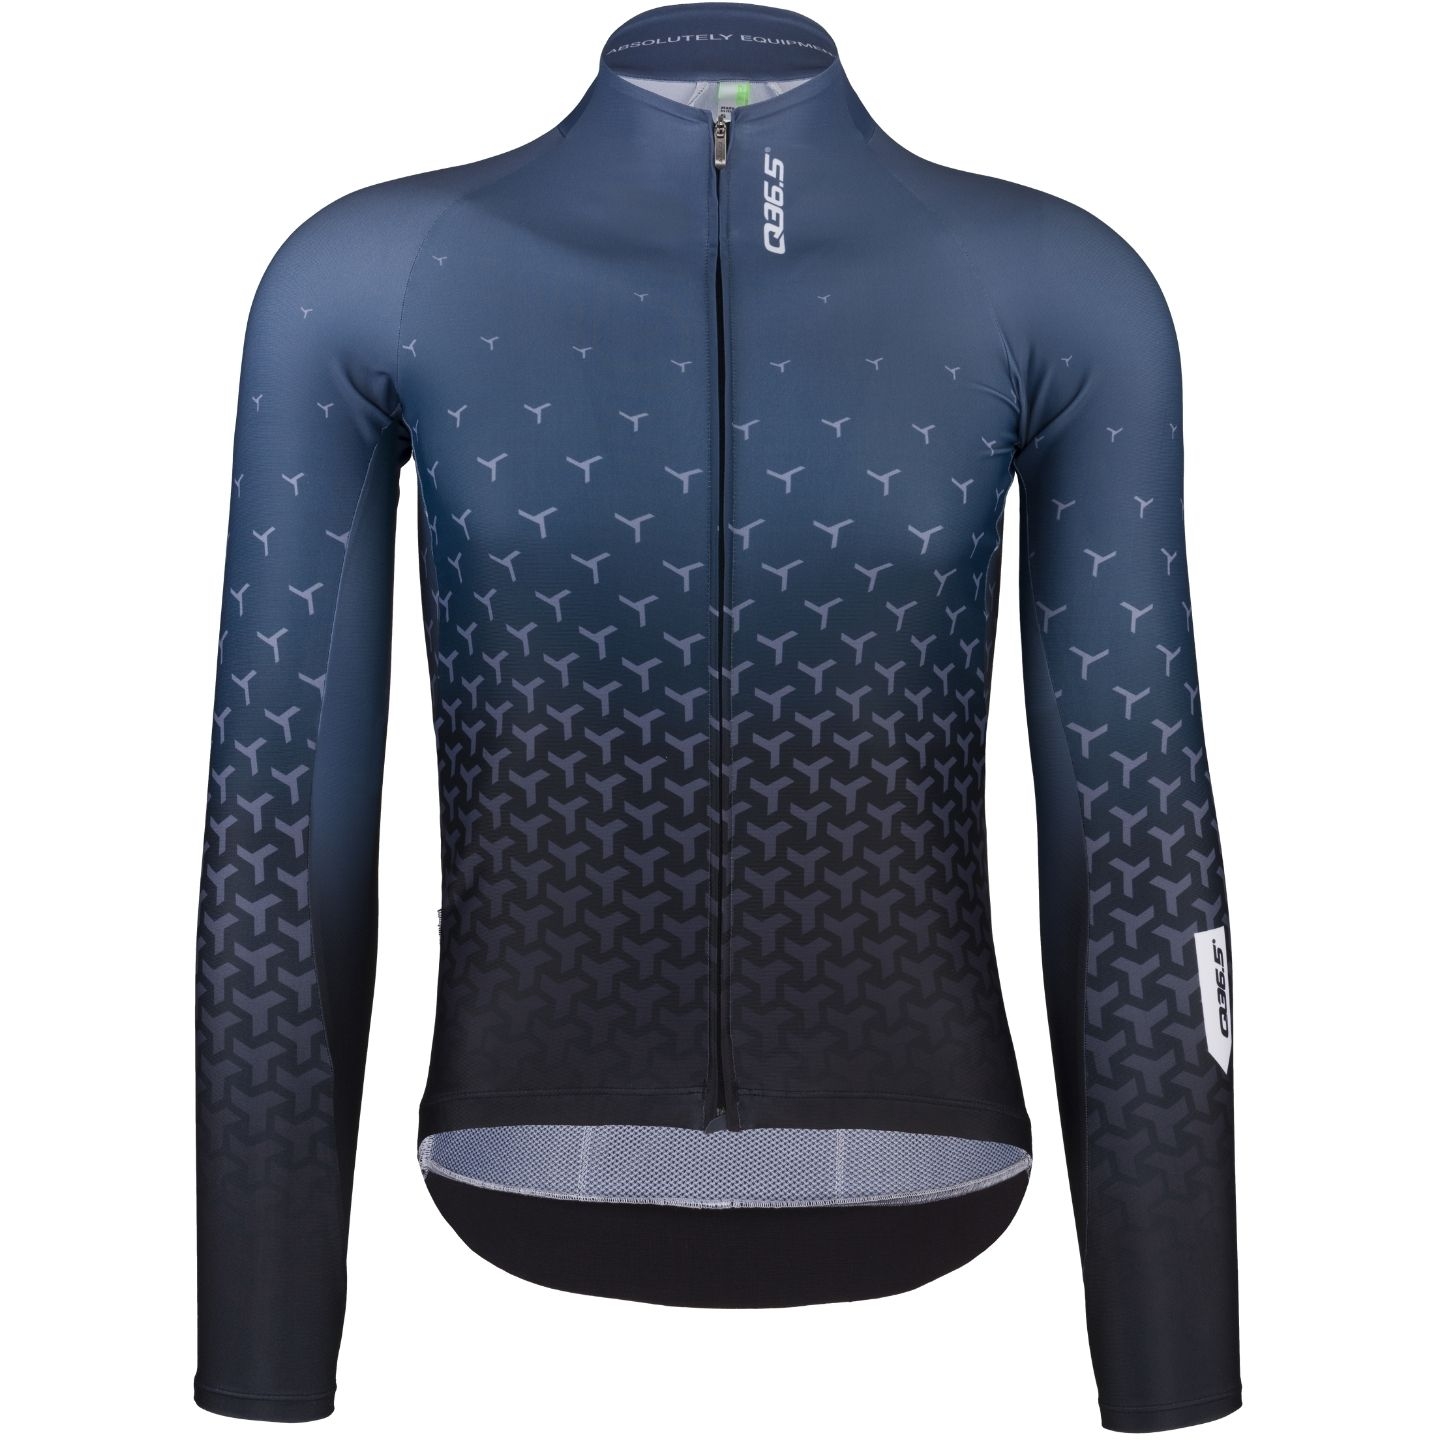 Picture of Q36.5 R2 Long Sleeve Jersey - black